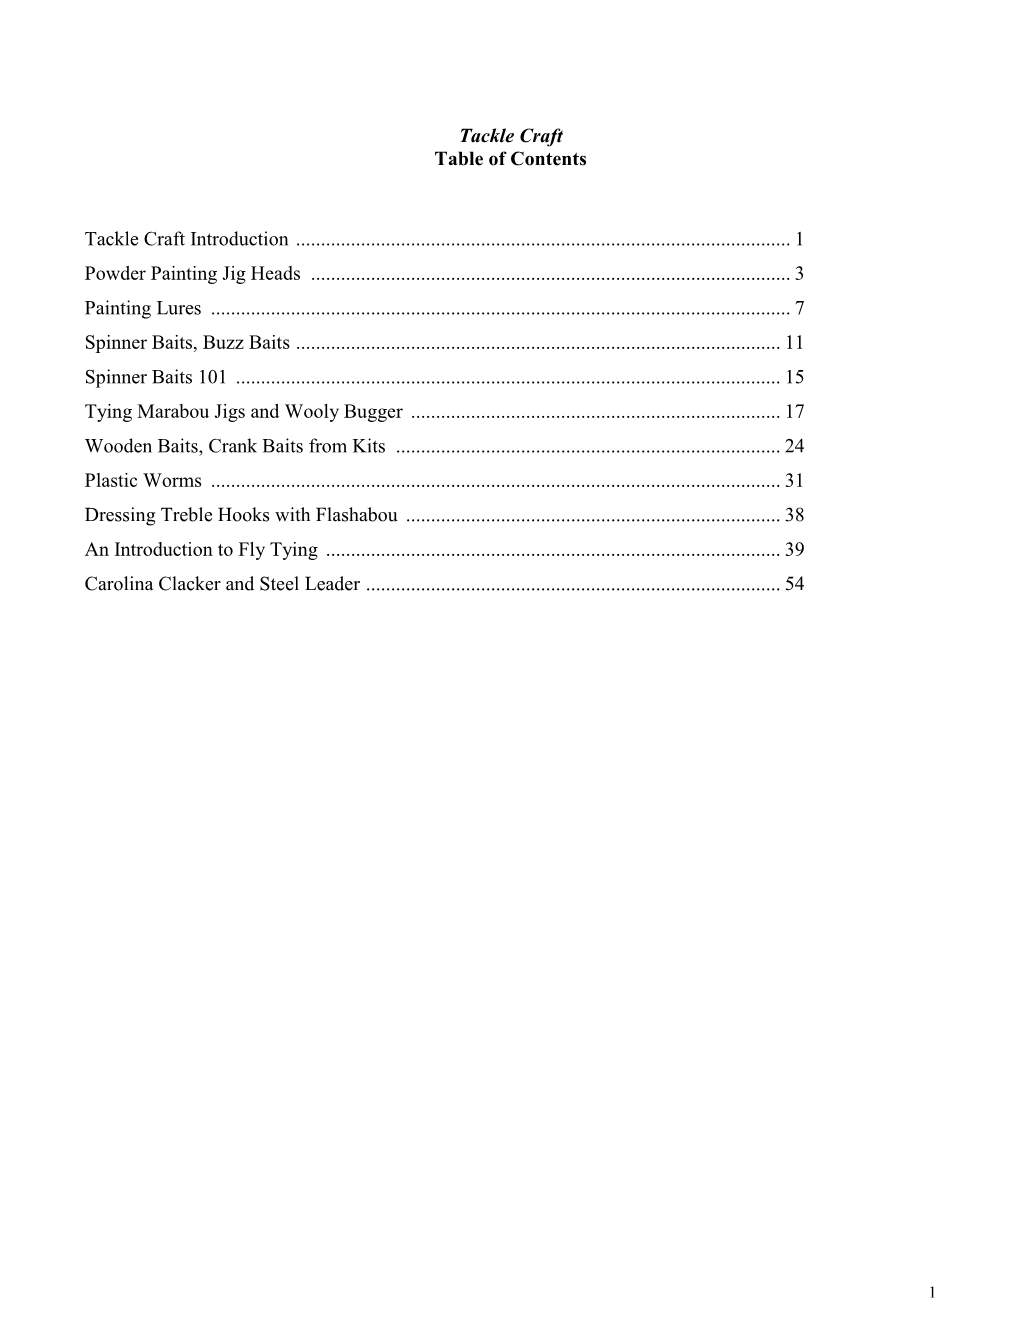 Tackle Craft Table of Contents